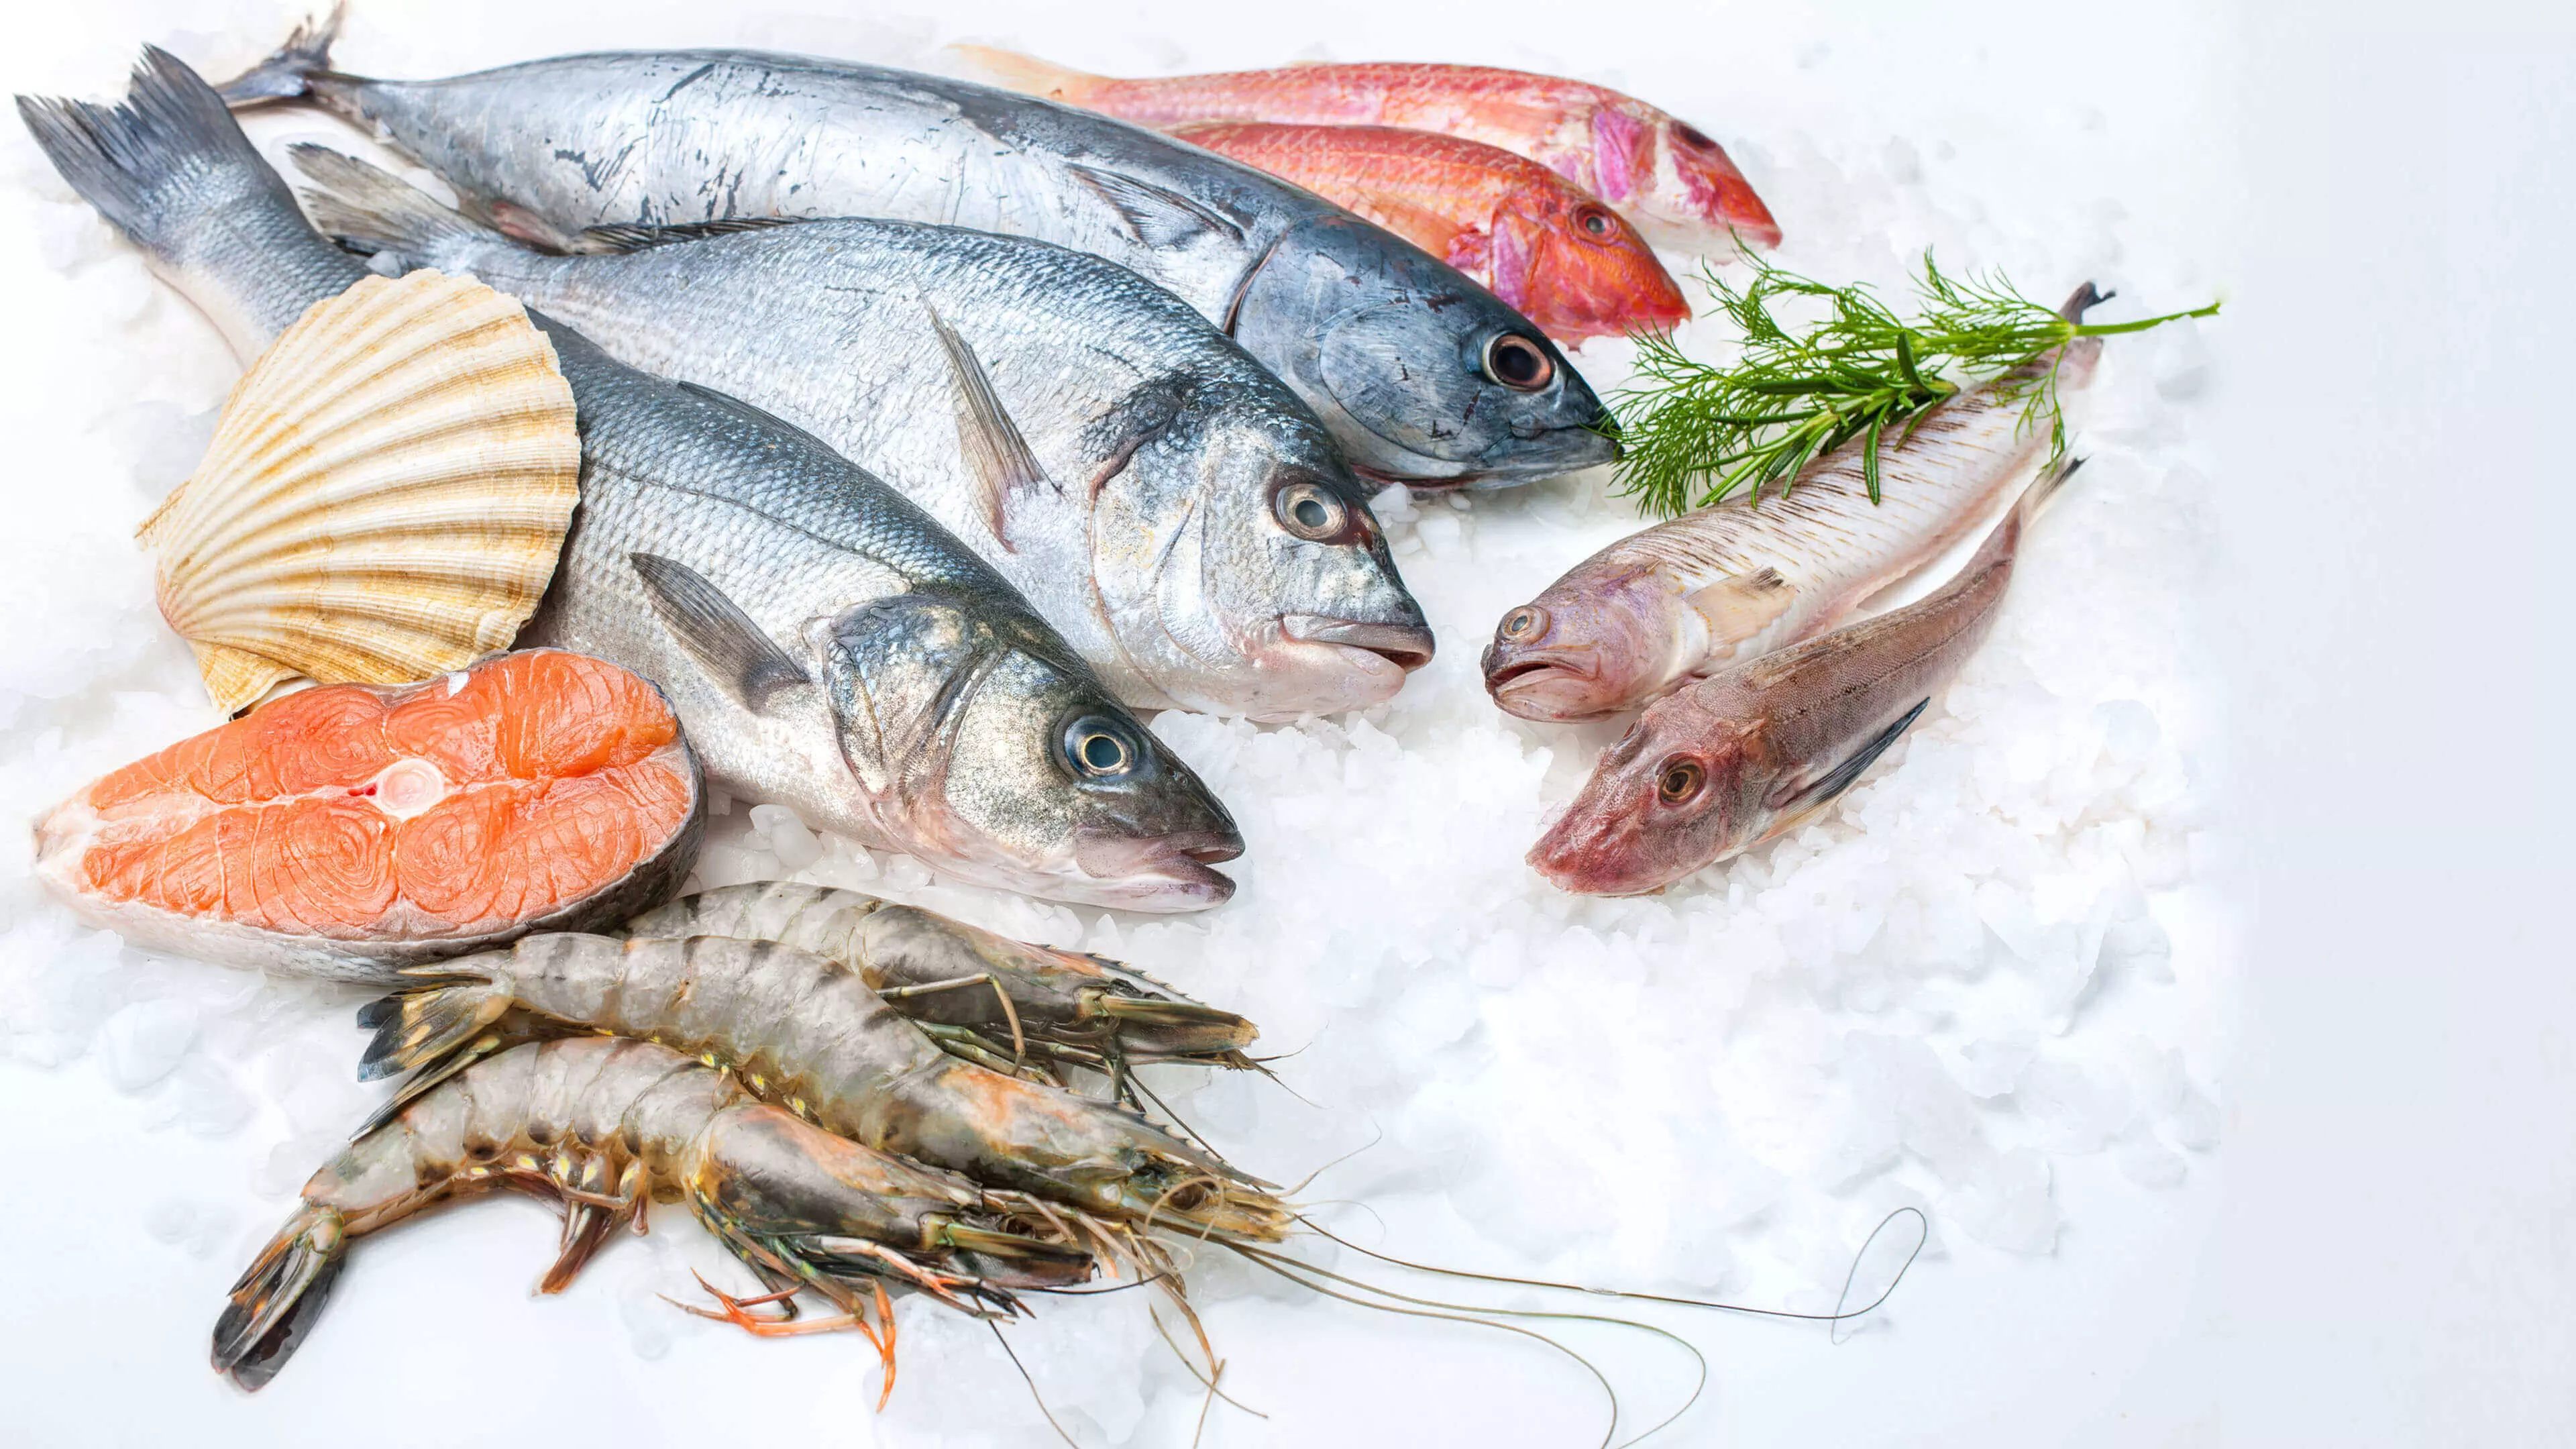 Consumption of more than 350 gram fish per week may prevent preterm birth, finds study